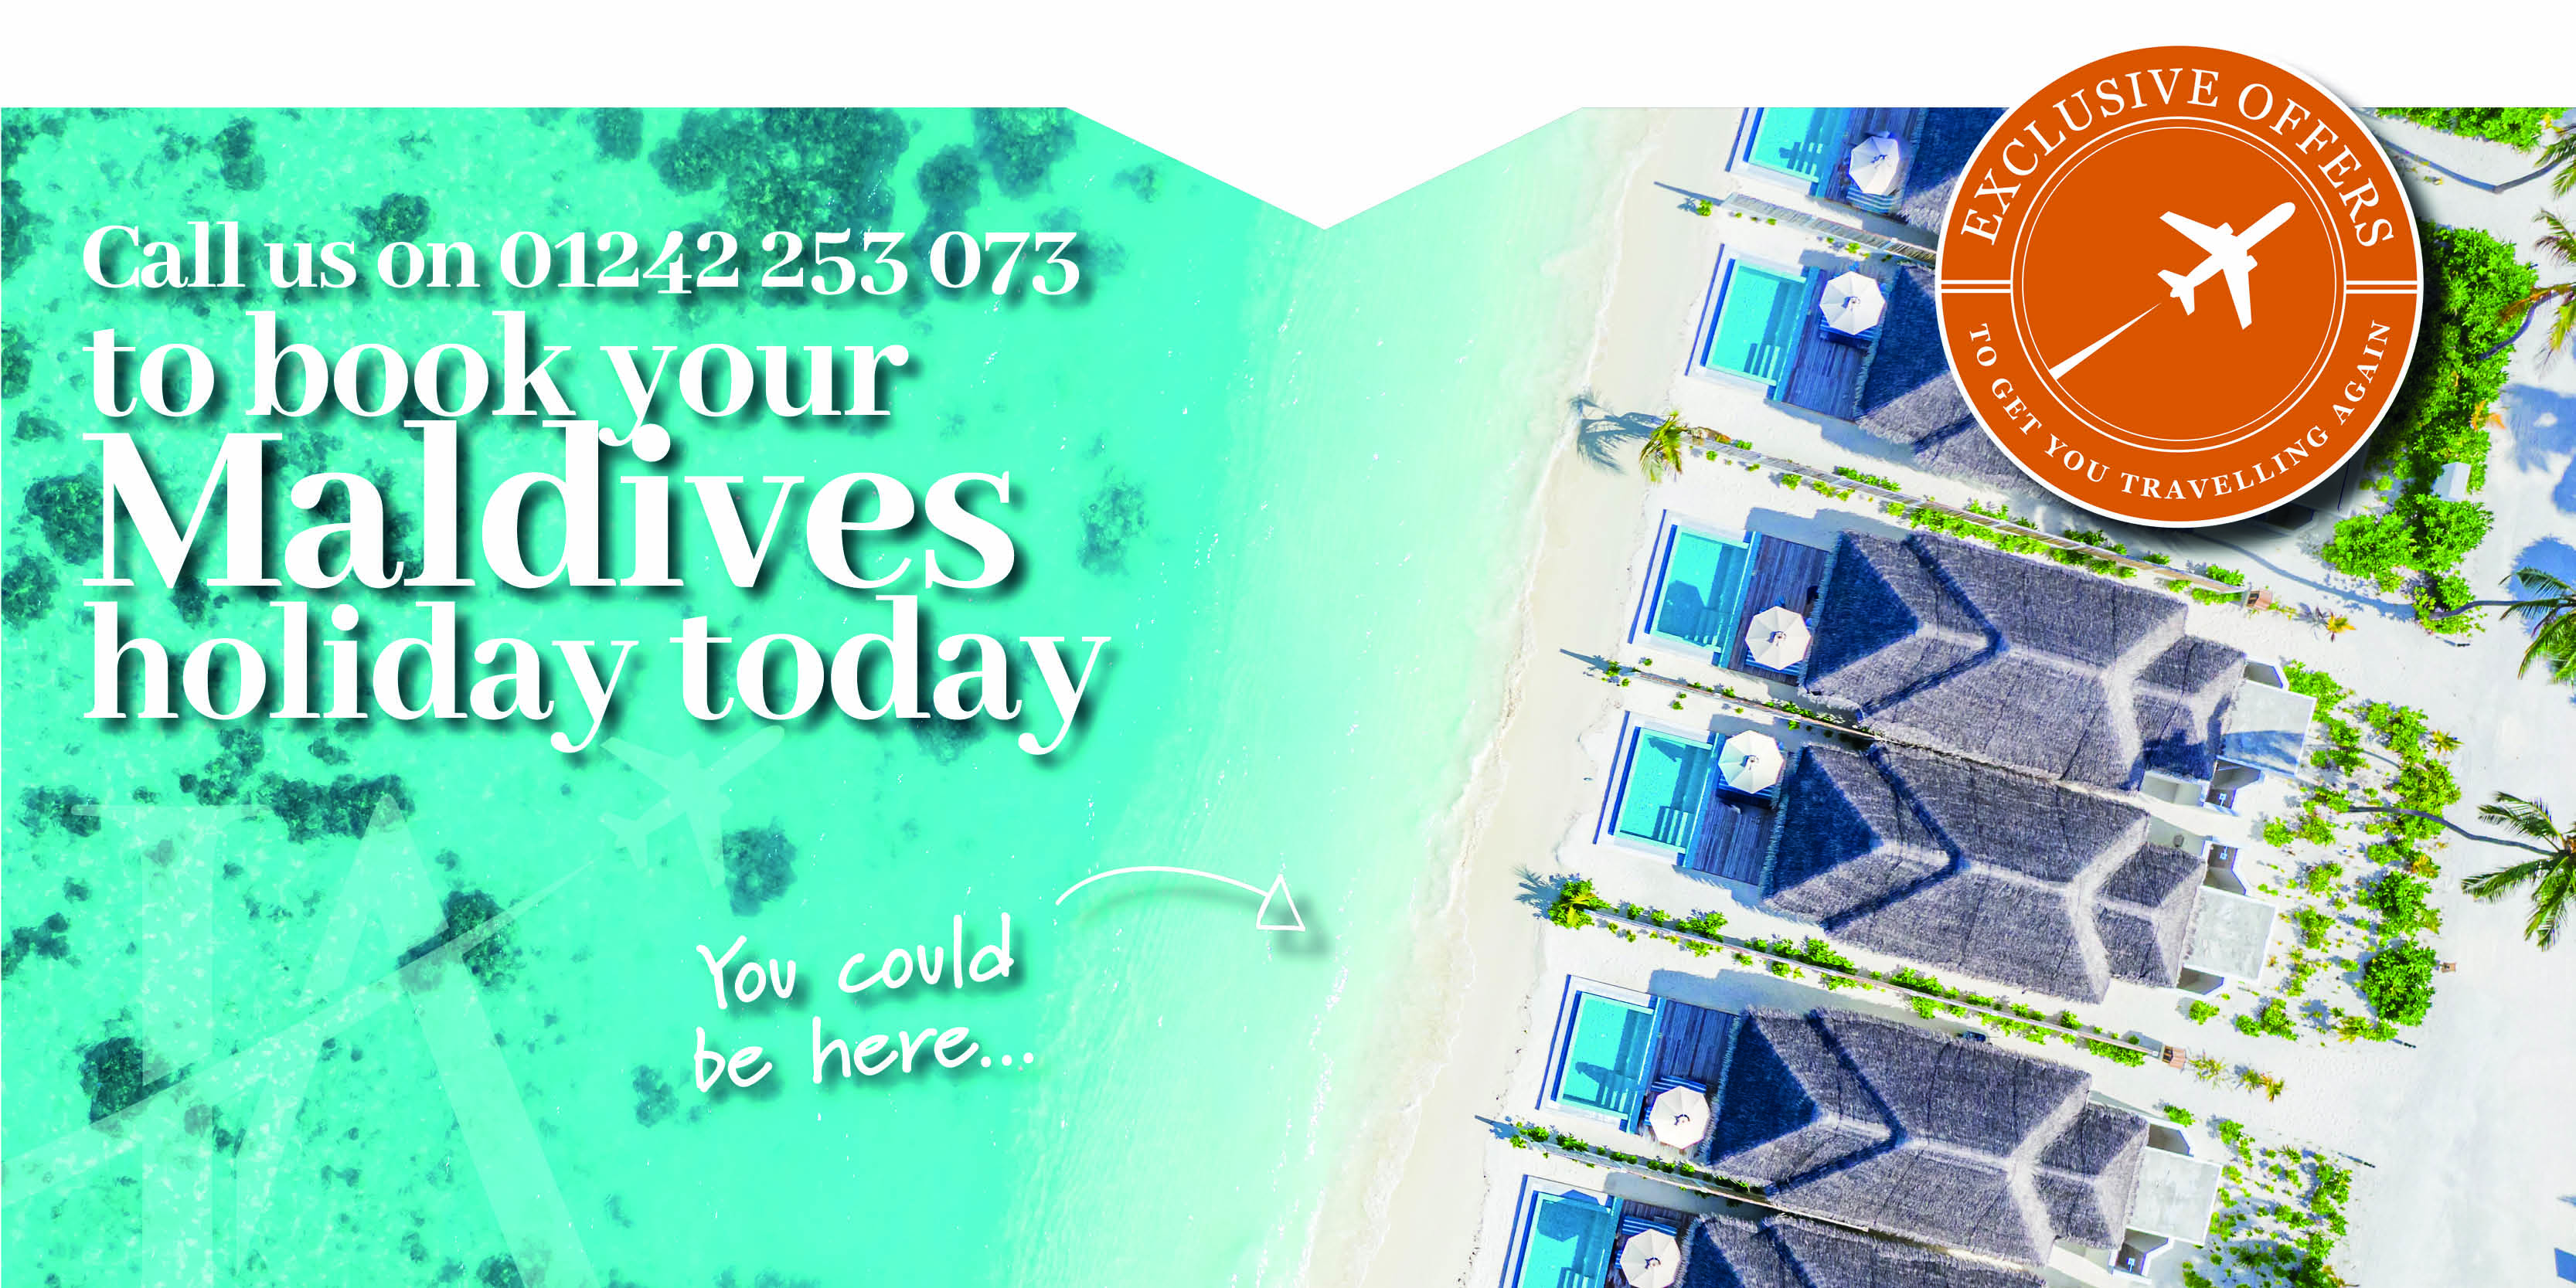 Maldives Holiday Offers get in touch_NEW BADGE11